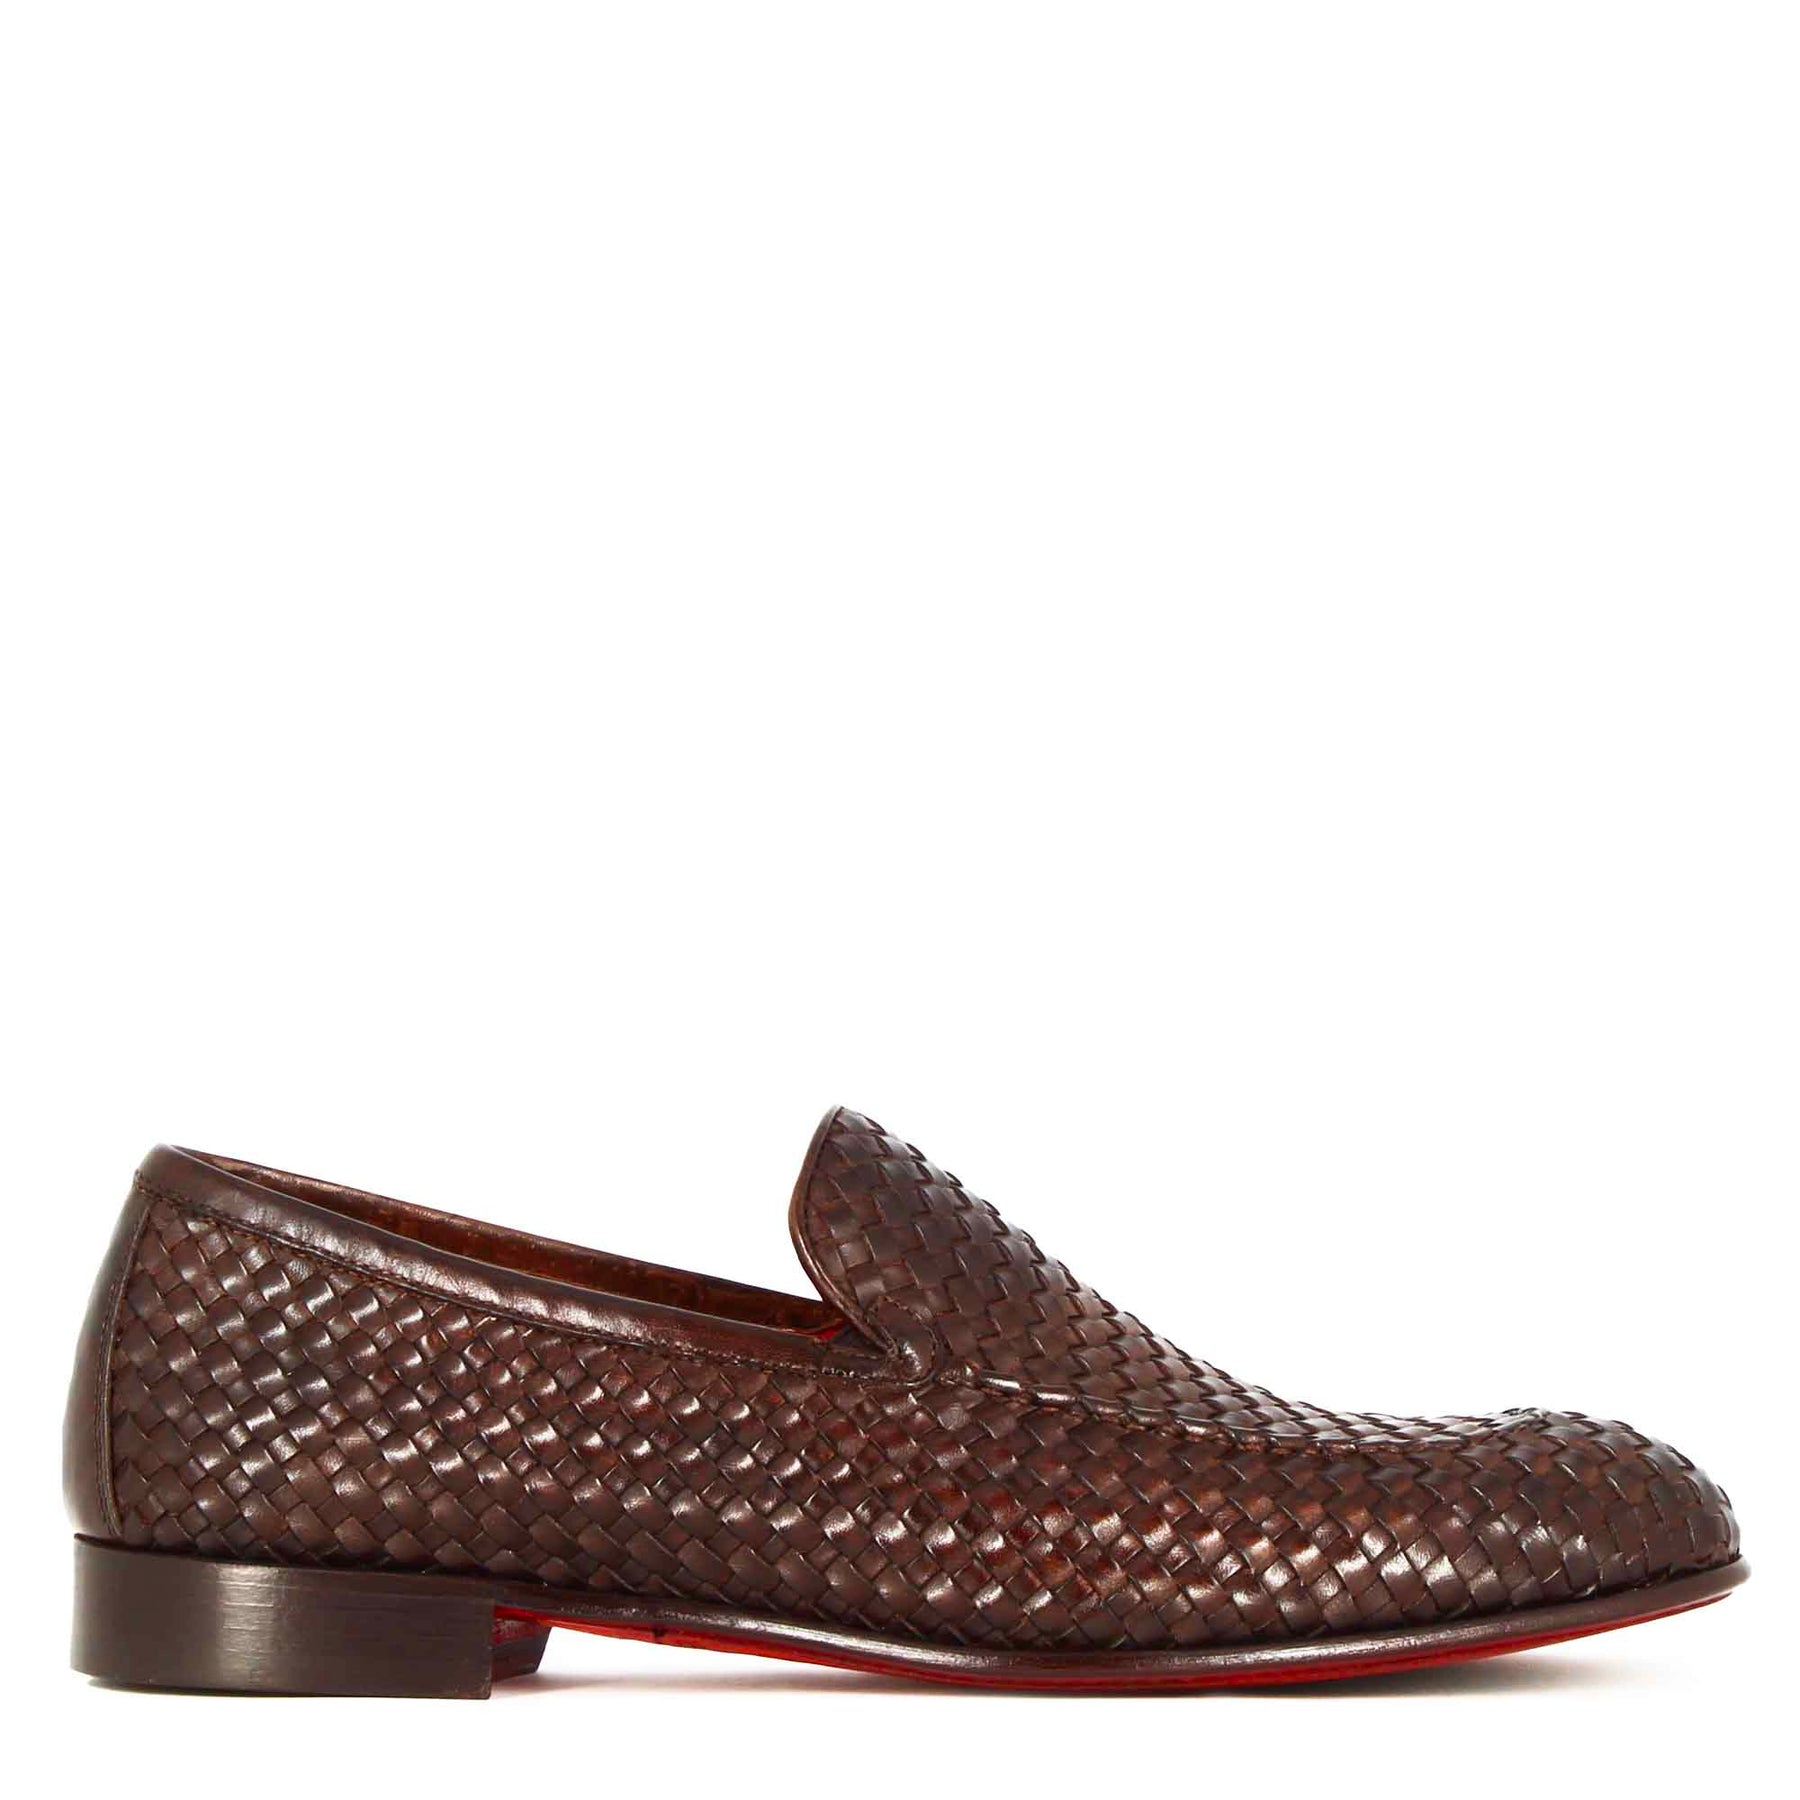 Classic men's moccasin in dark brown woven leather